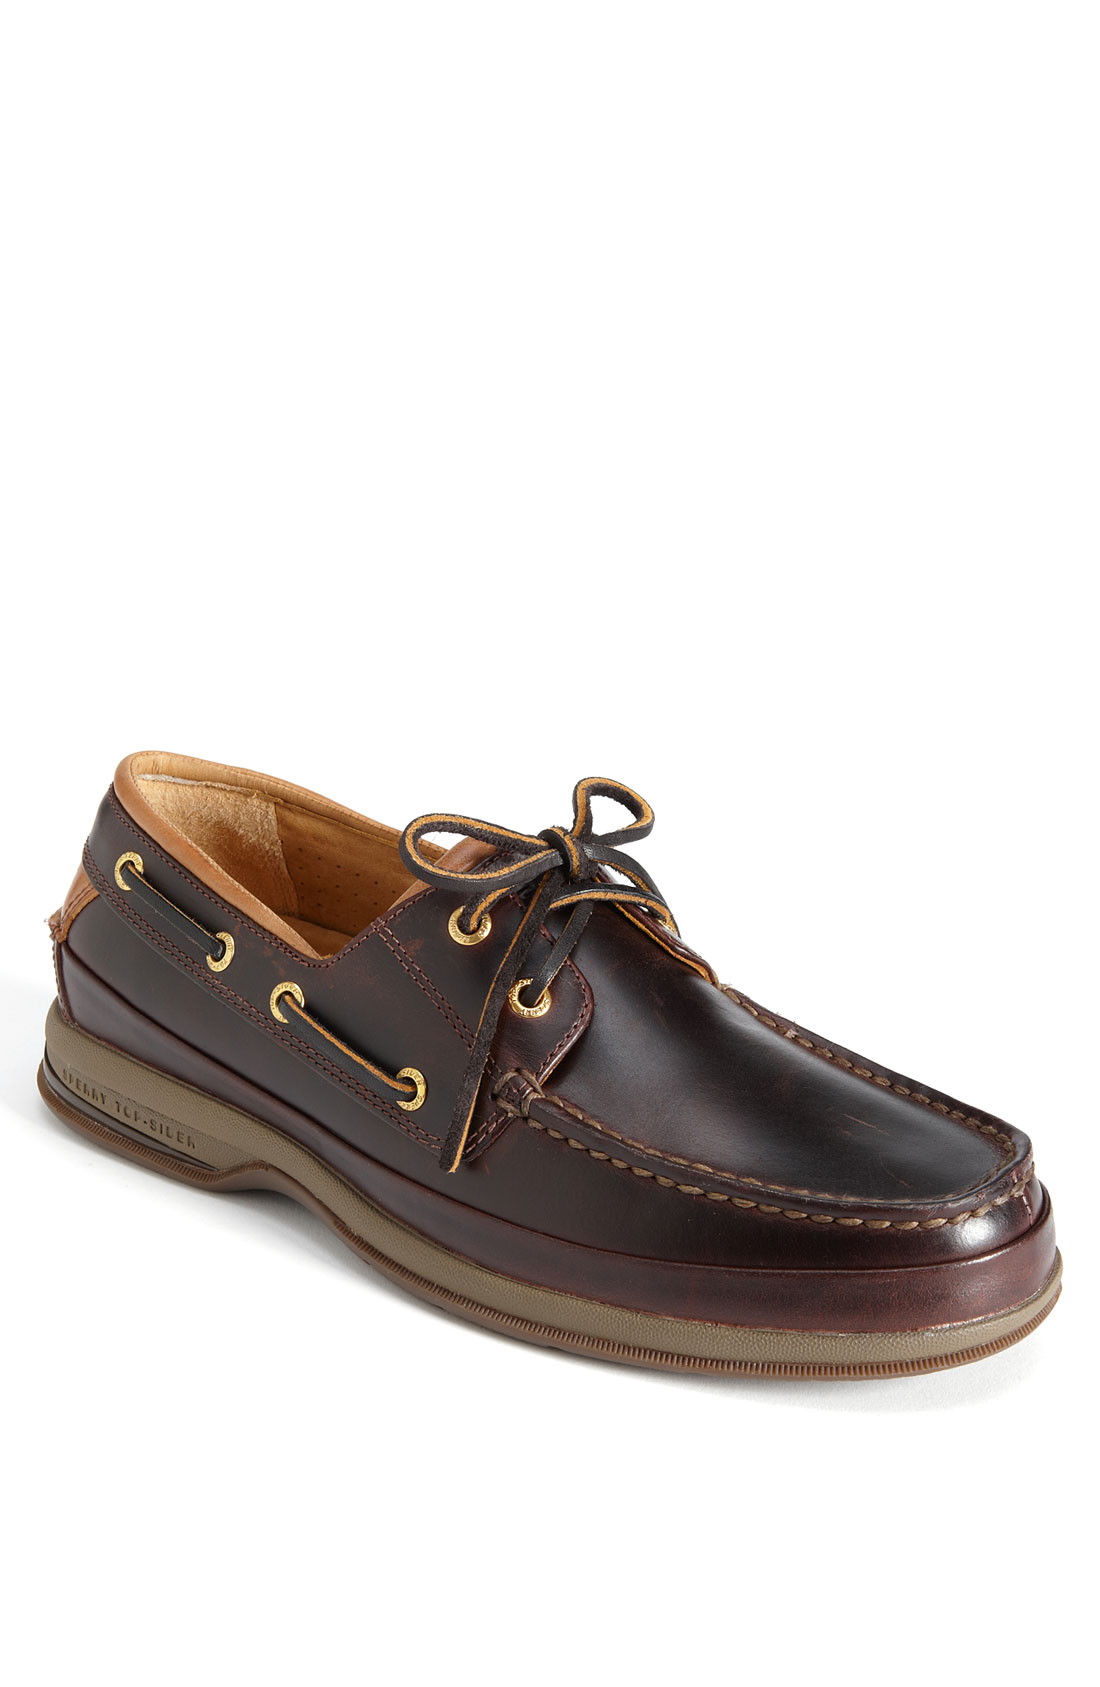 Sperry Top-sider 'Gold Cup 2-Eye Asv' Boat Shoe in Brown for Men ...